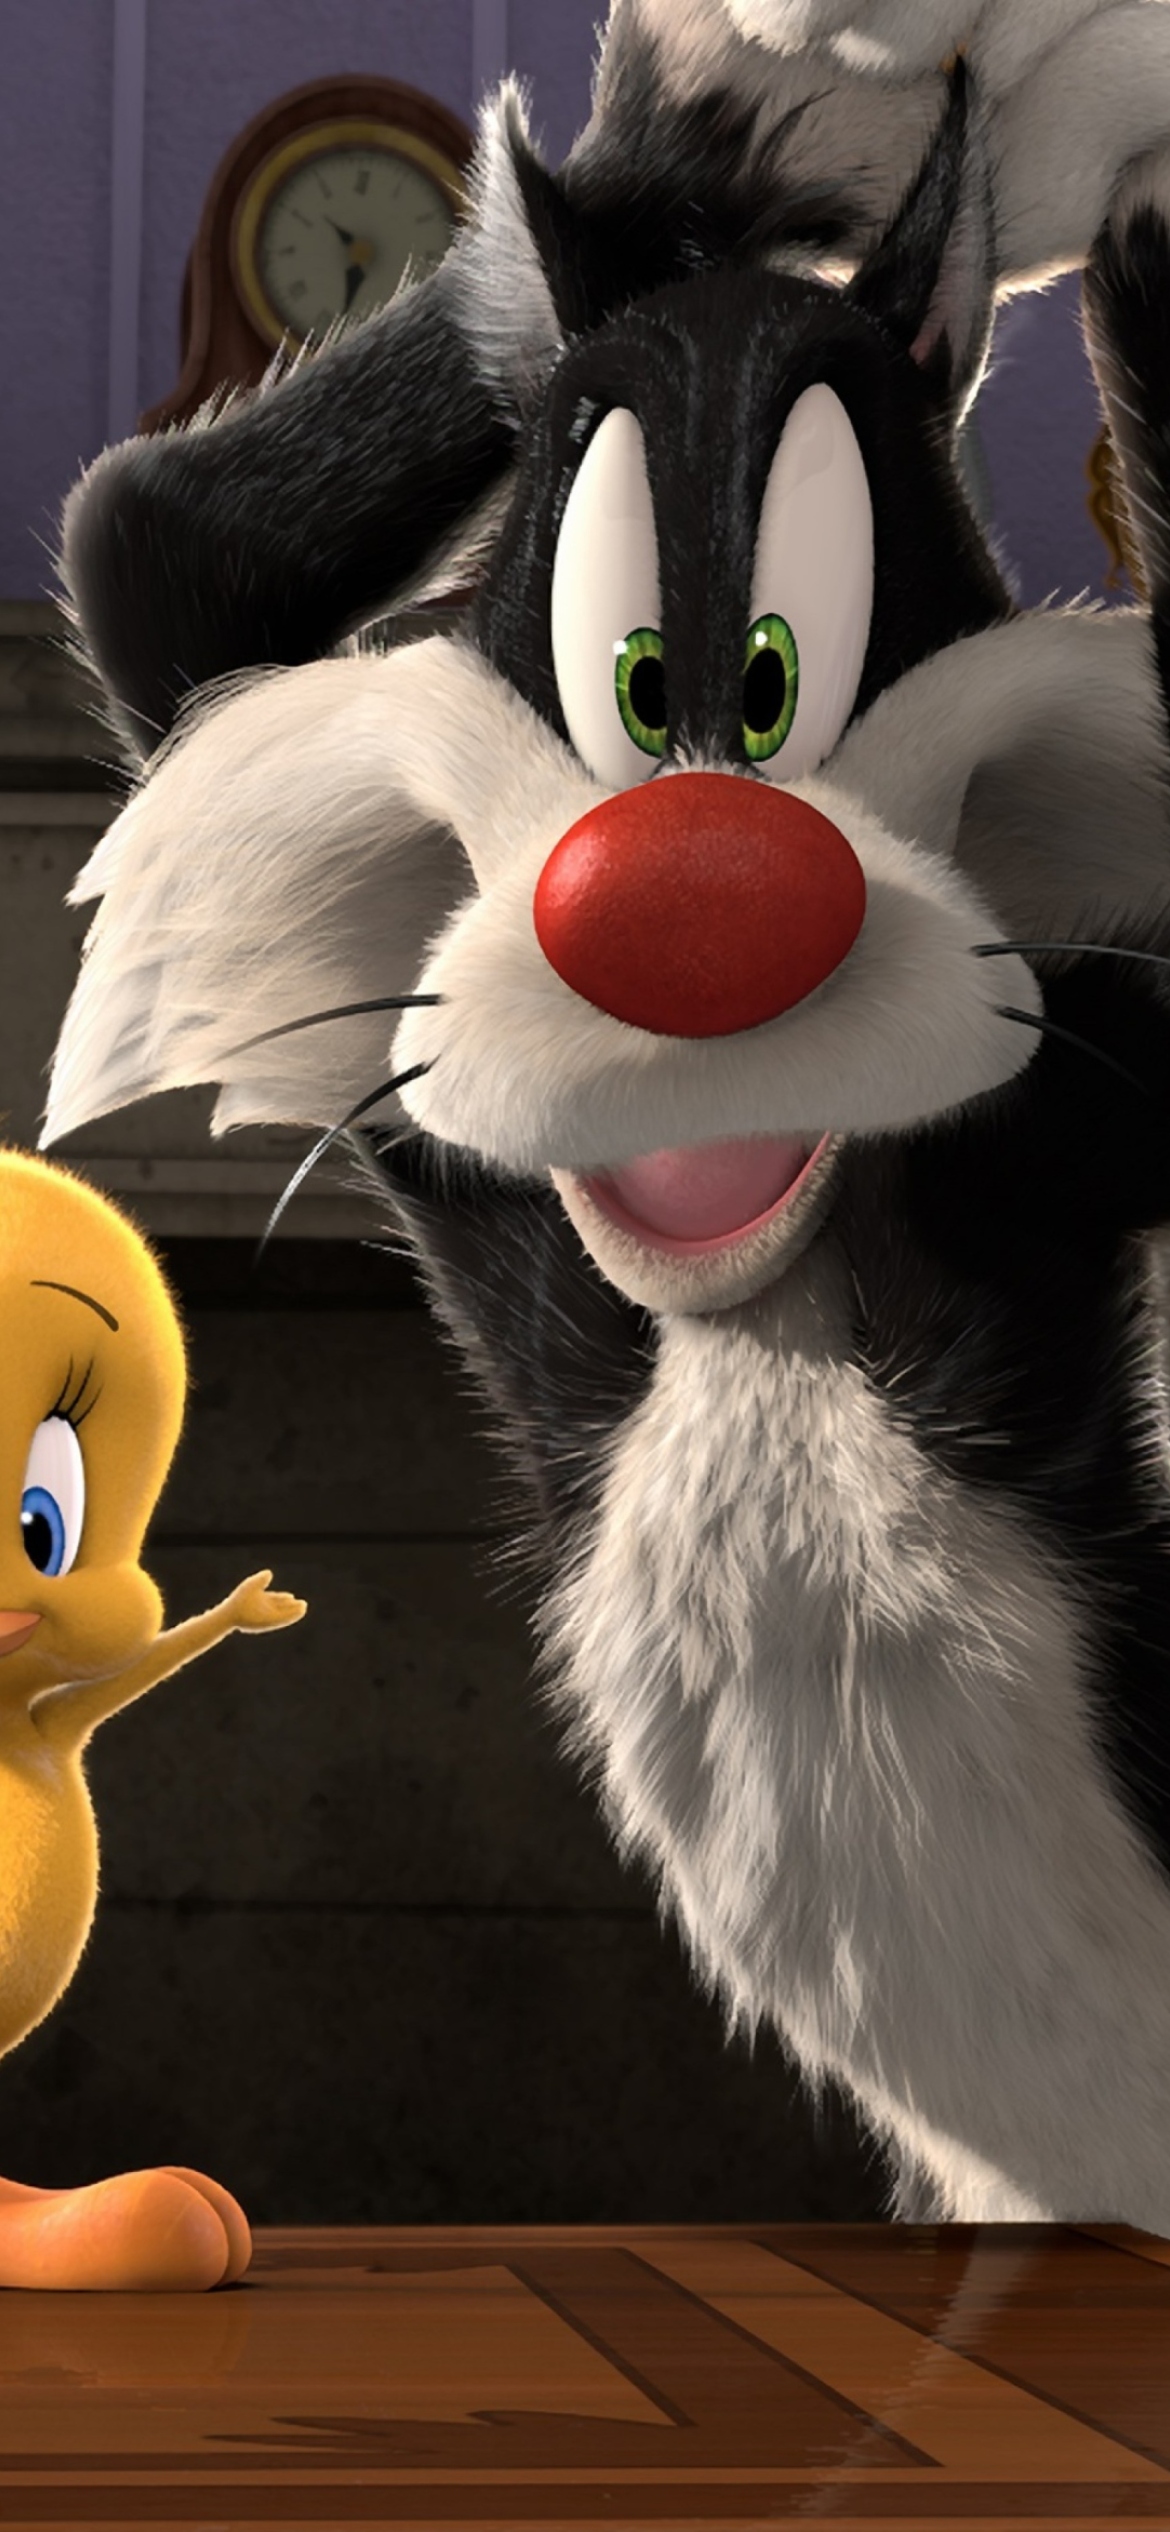 Sylvester And Tweety wallpaper 1170x2532